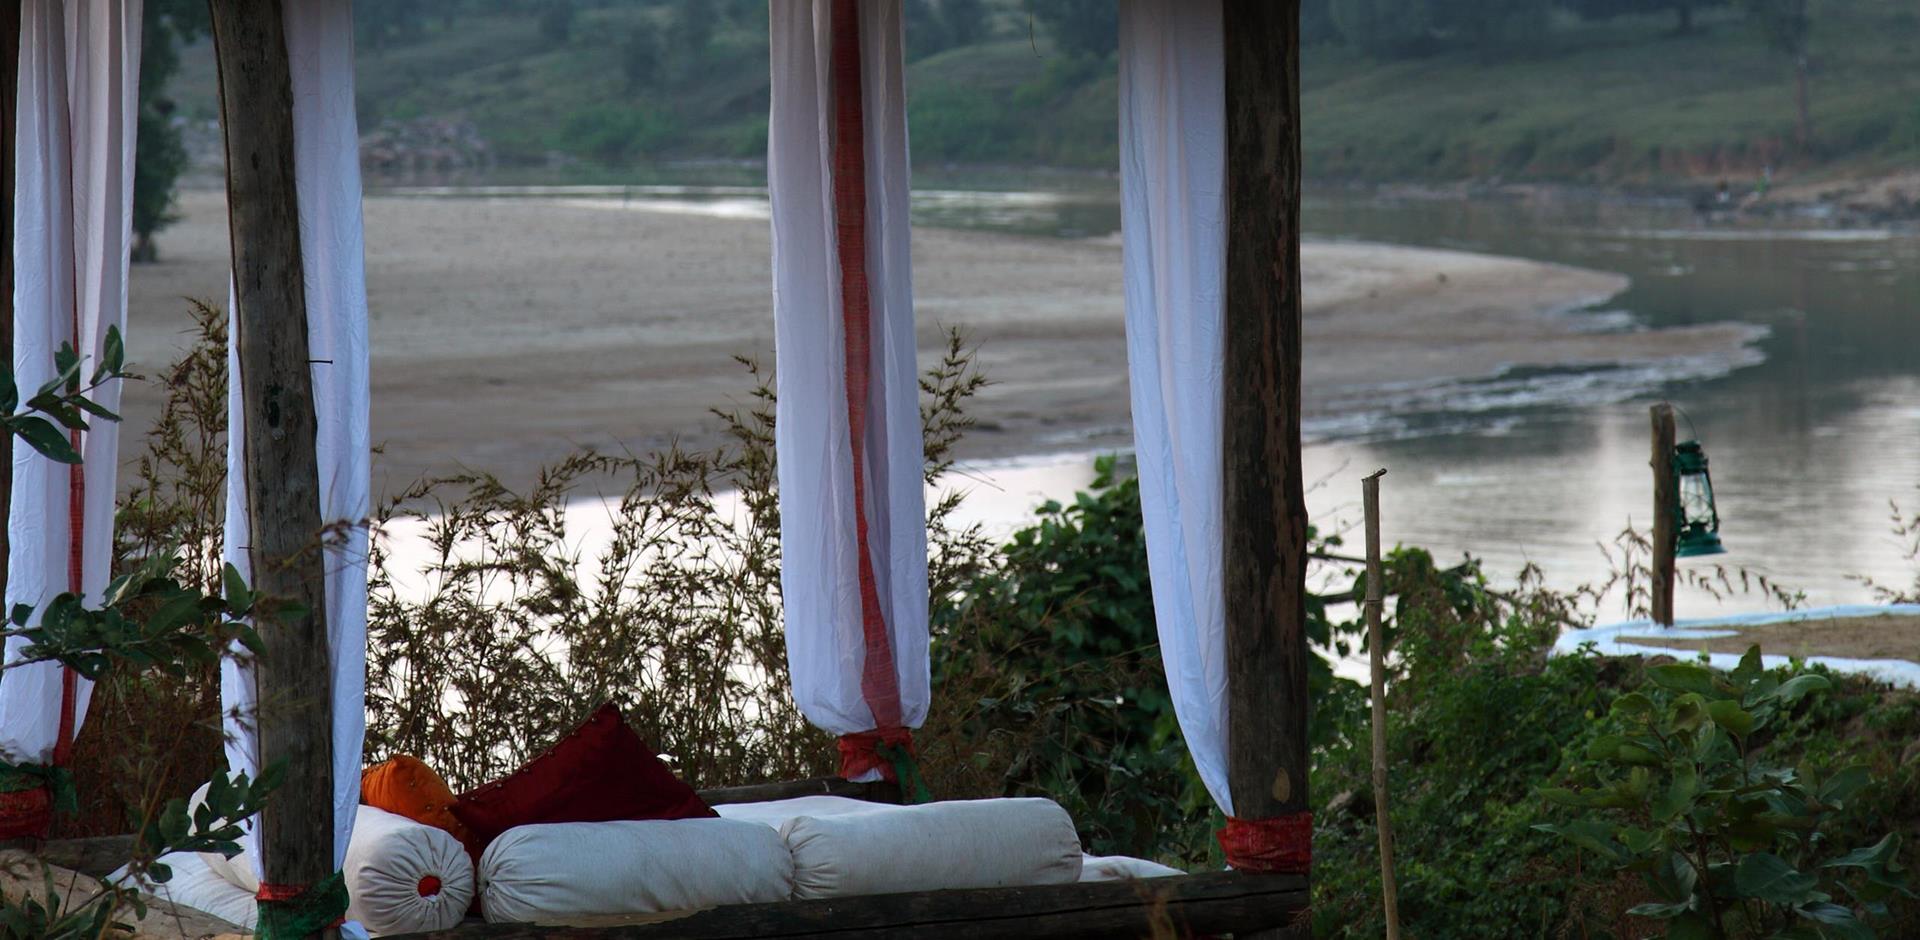 Outdoor bed, Flame of the Forest Safari Lodge, Kanha National Park, India